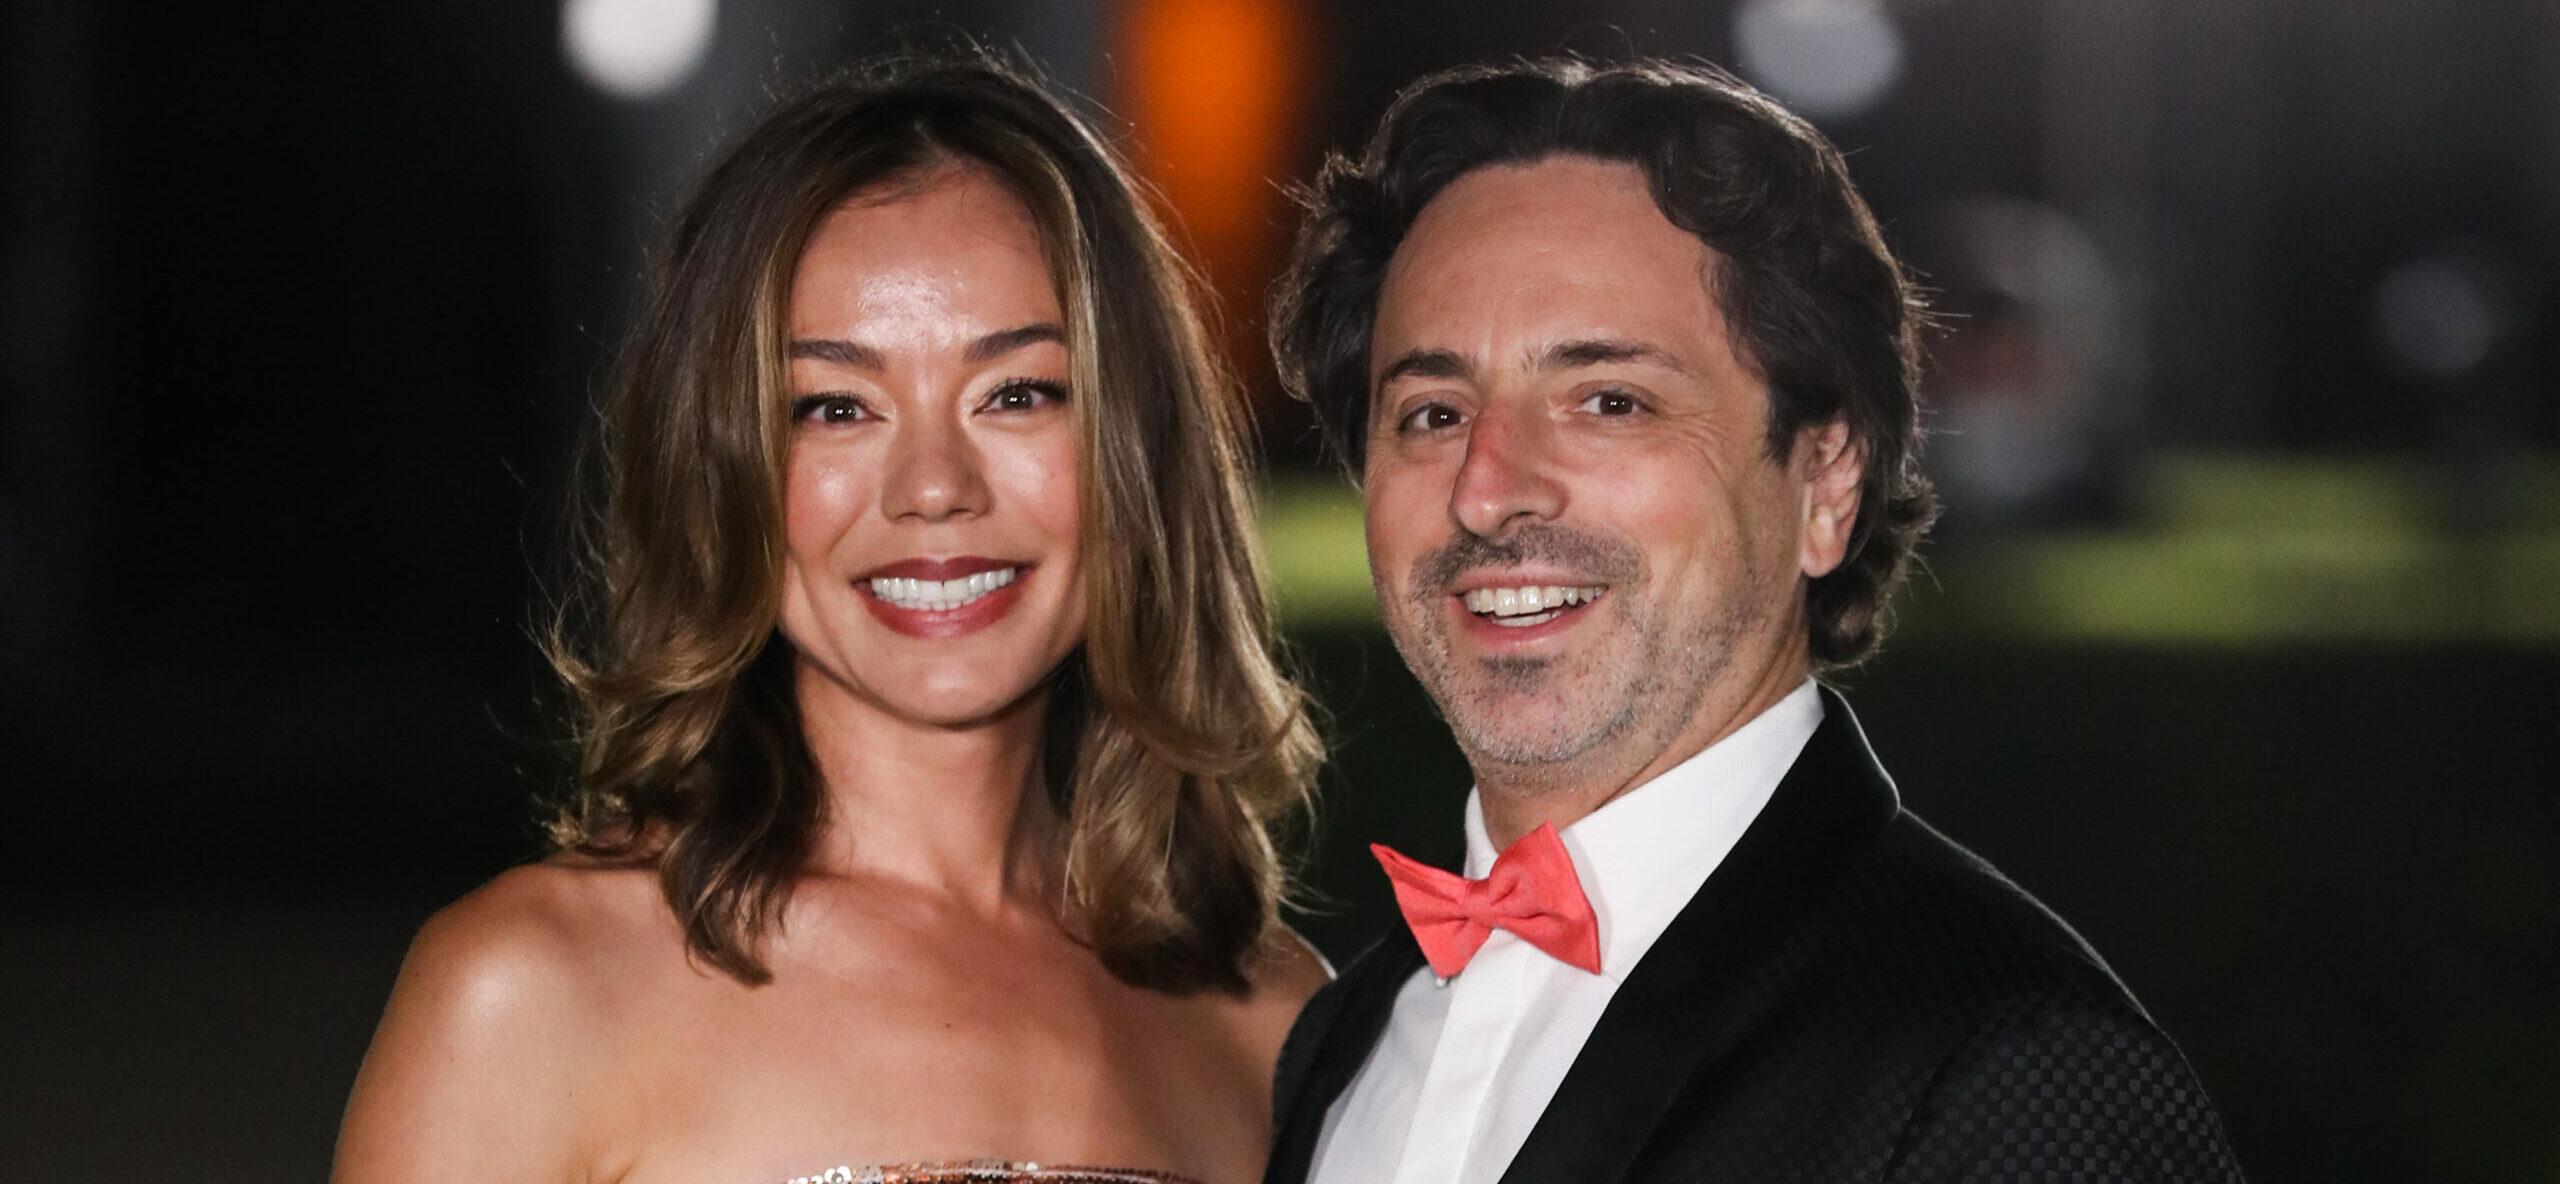 Google Co-Founder Sergey Brin Files For Divorce From Nicole Shanahan.